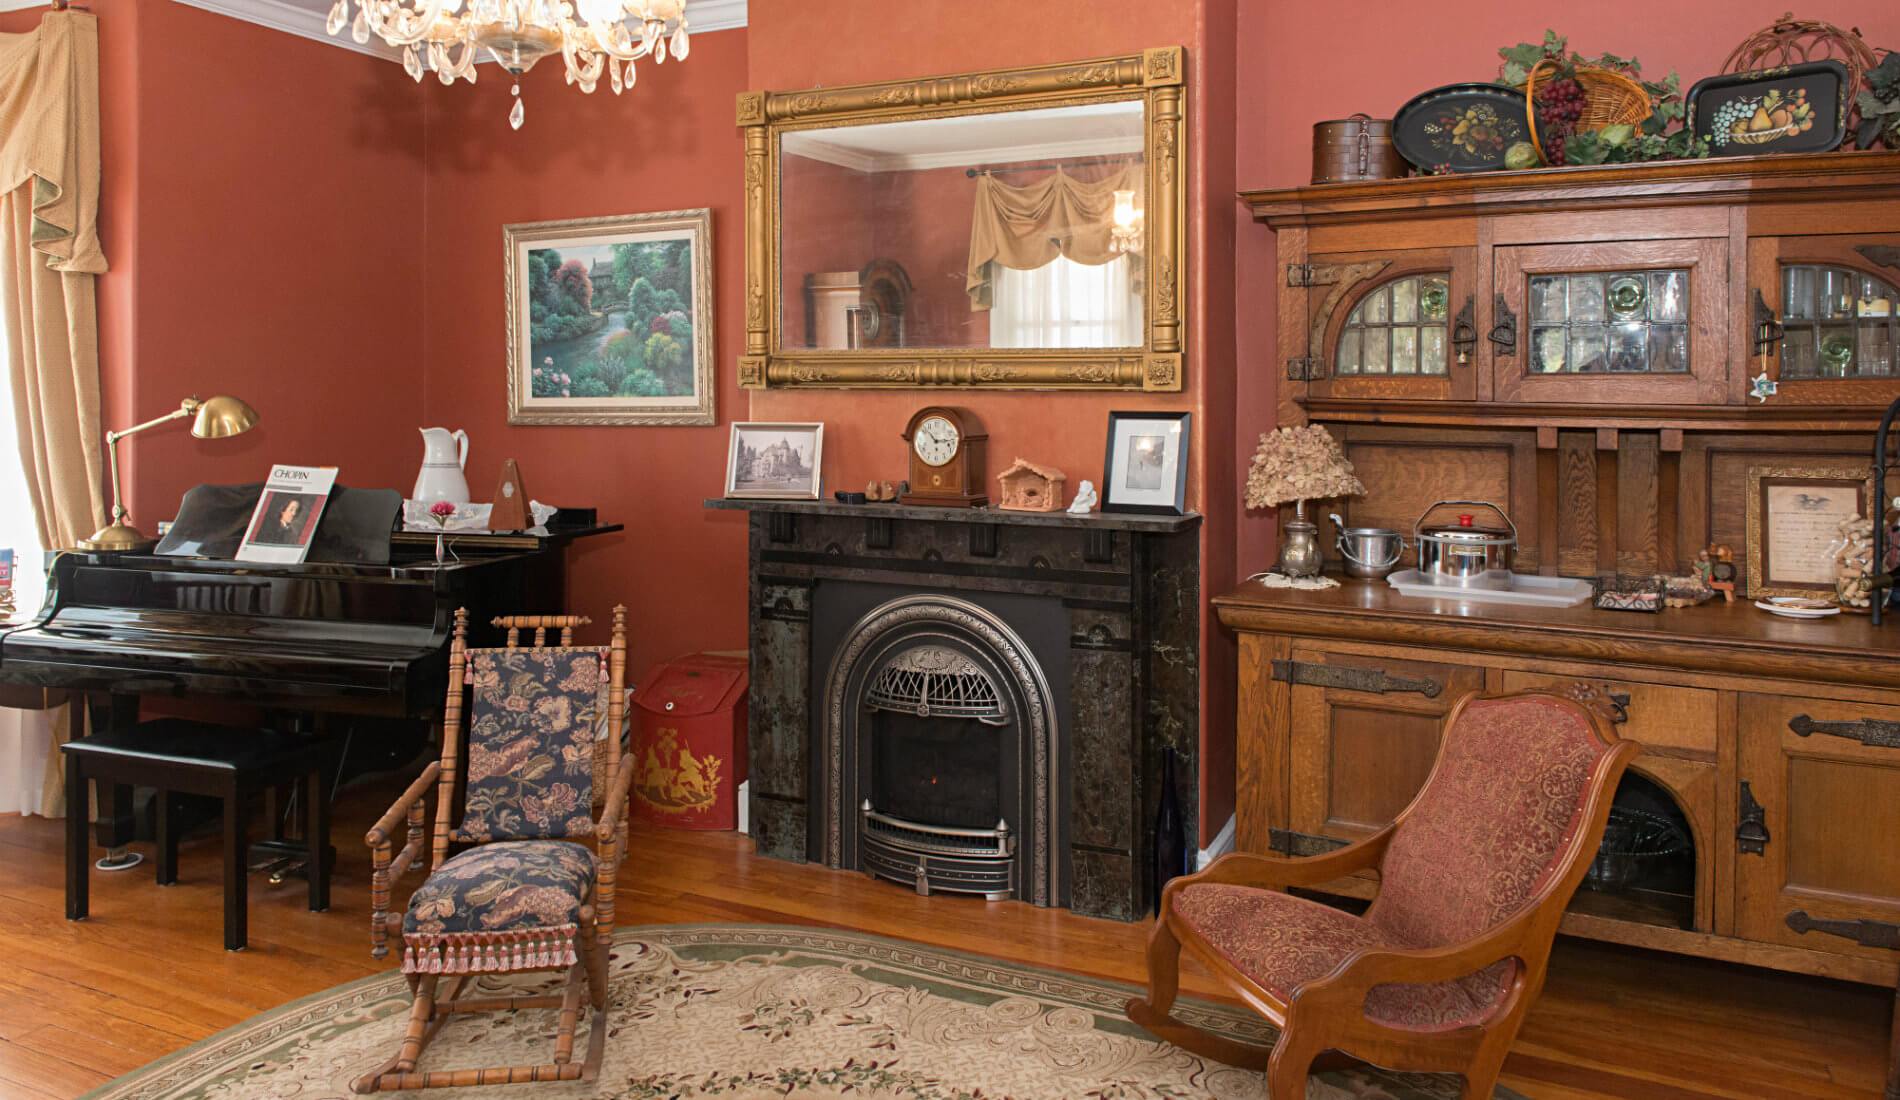 Dark orange room featuring a shiny black grand piano, a fireplace and mantel, and two cushioned sitting chairs